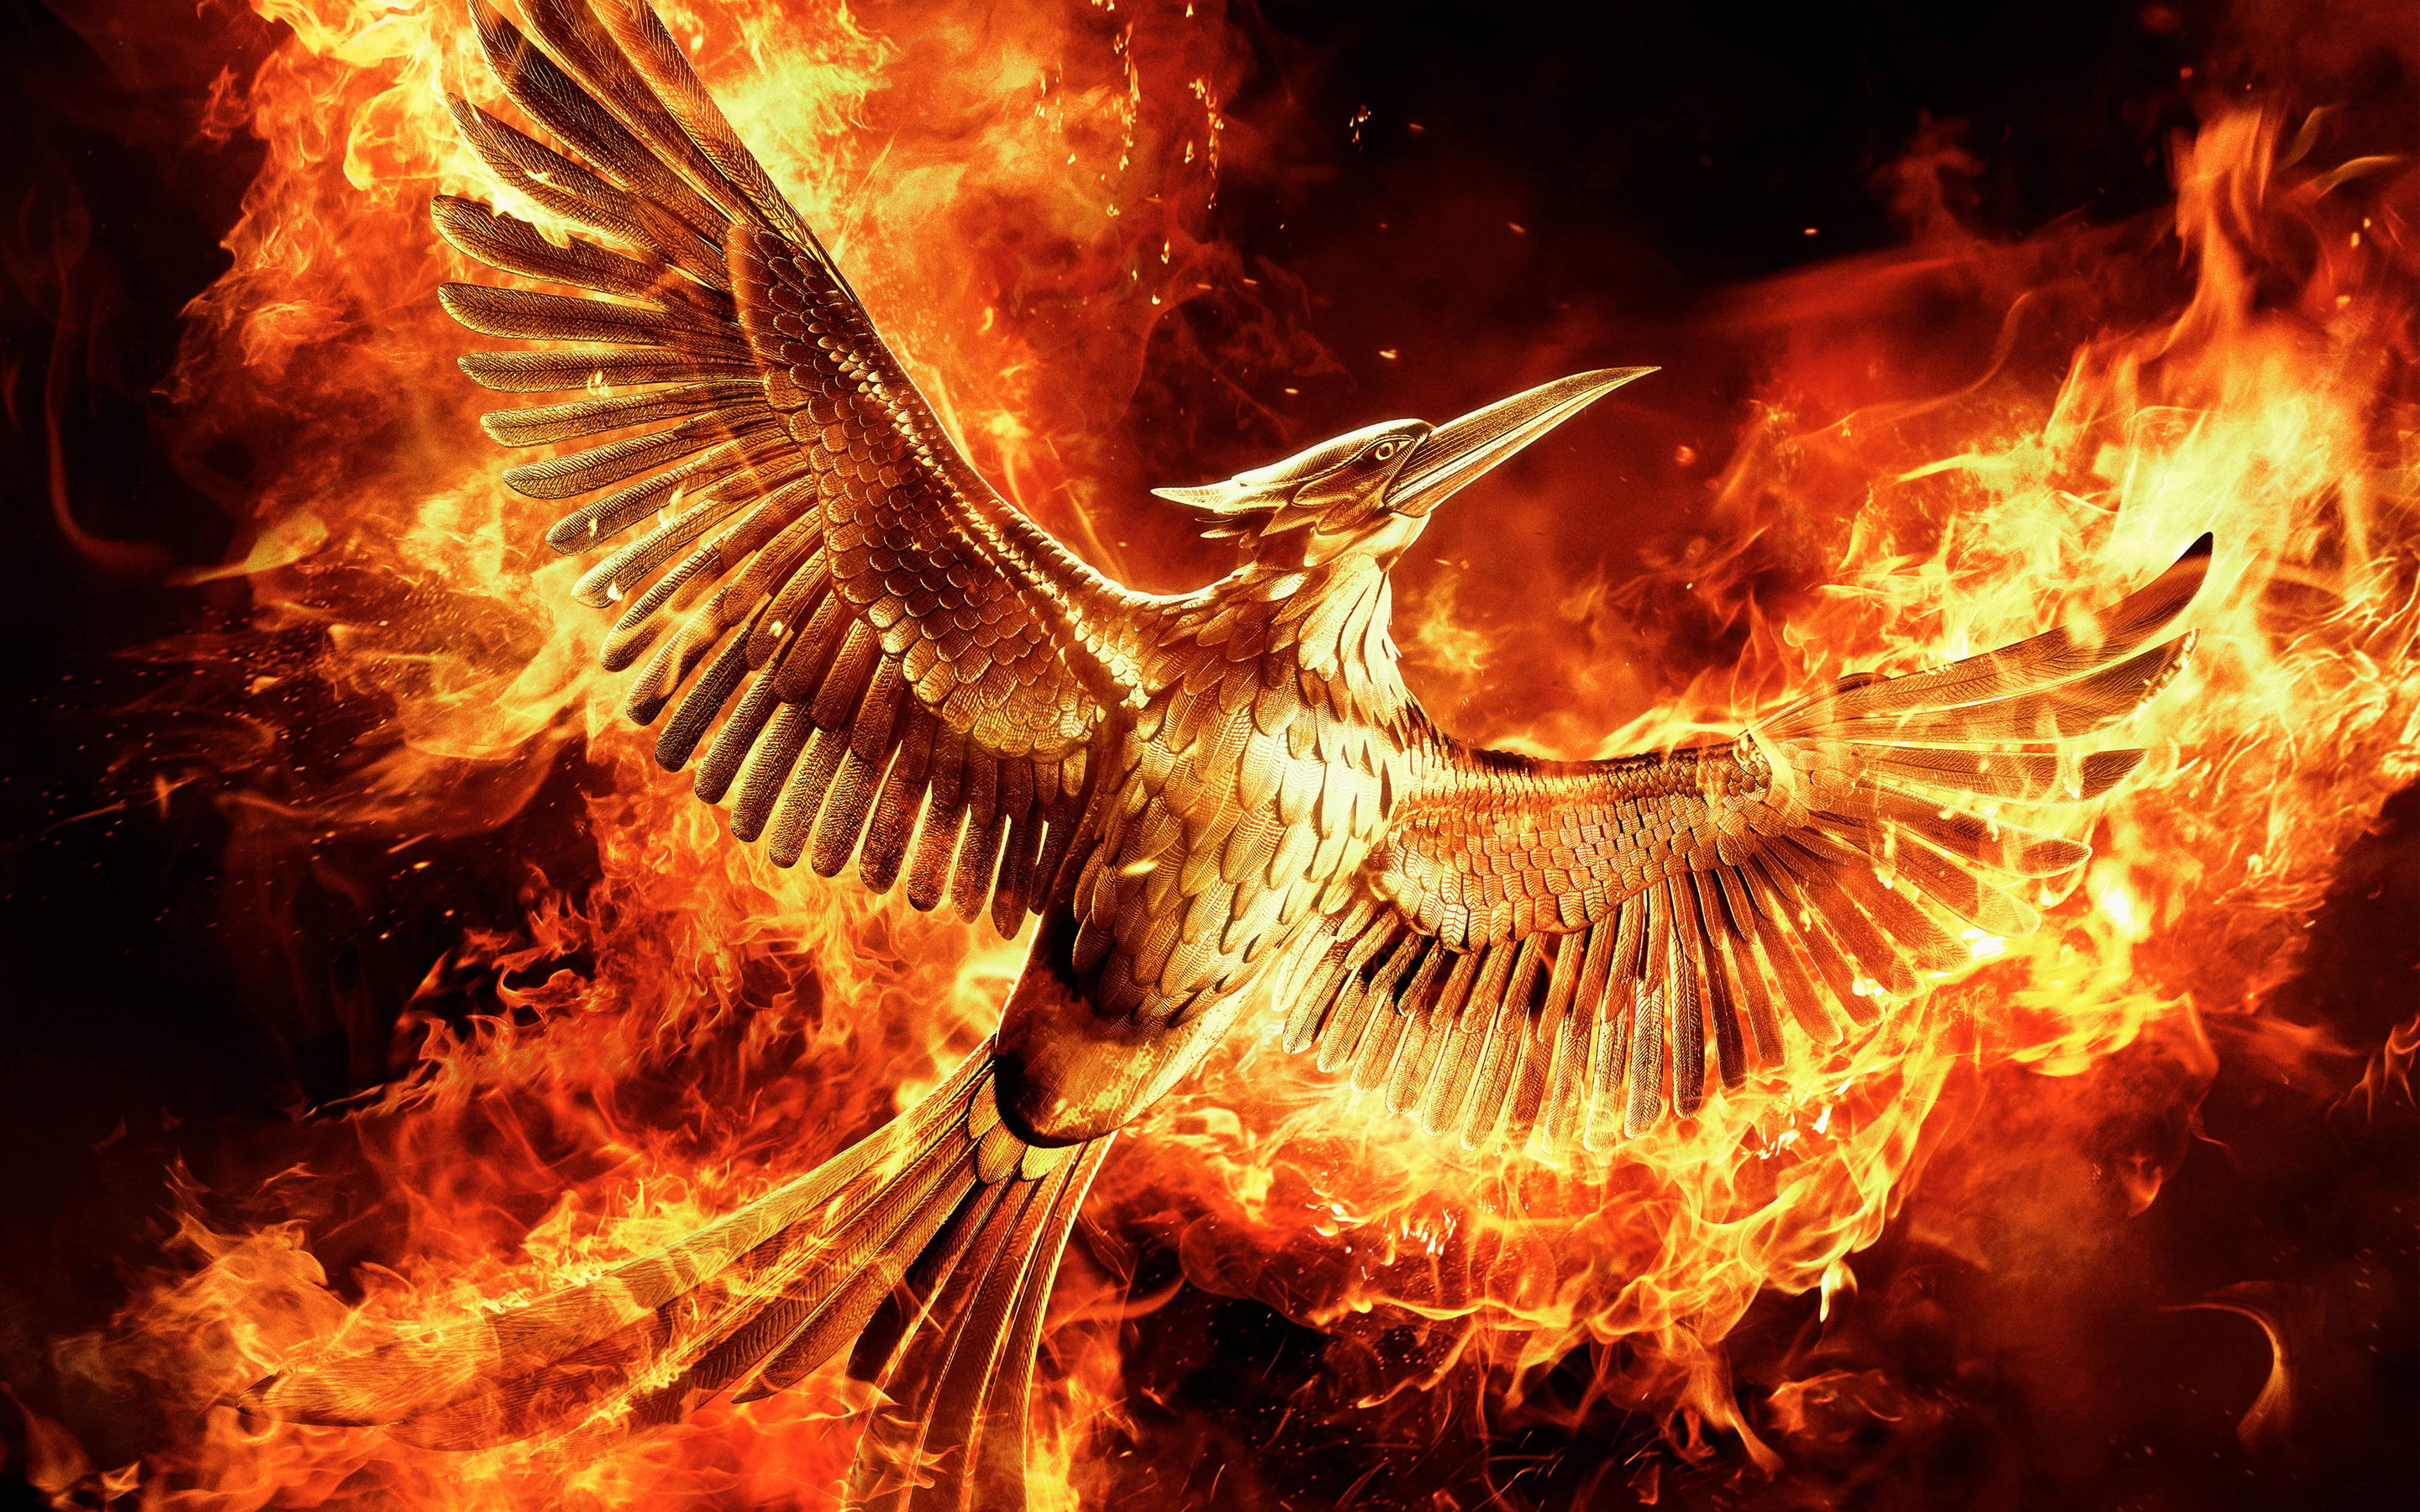 Free download Hunger Games Mockingjay Part 2 Wallpapers HD